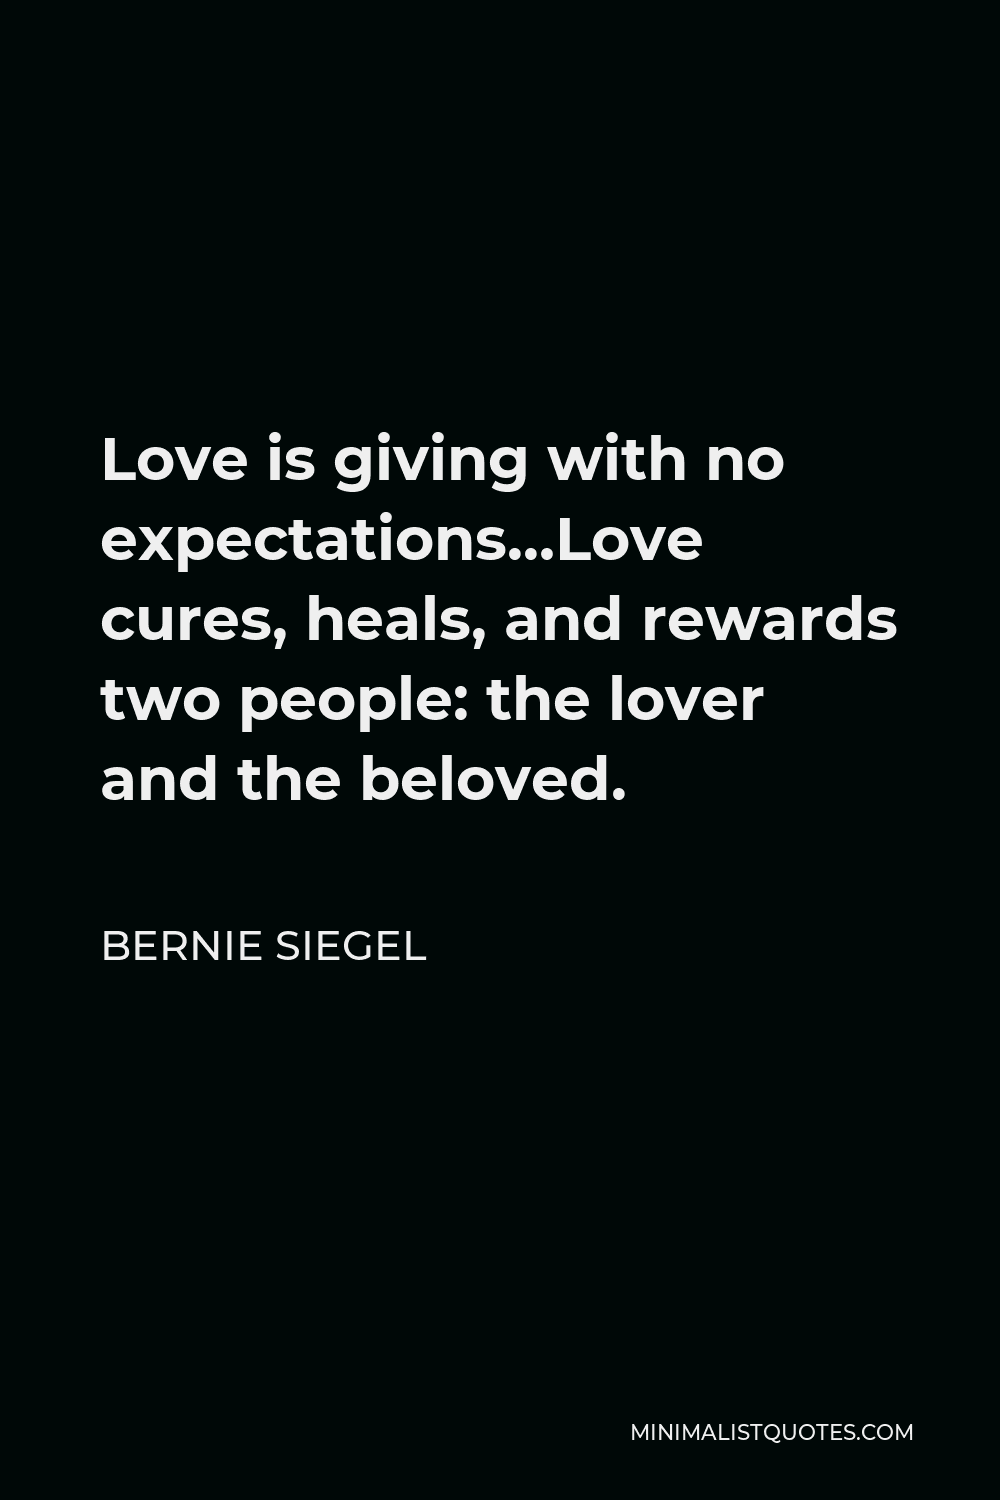 Bernie Siegel Quote - Love is giving with no expectations…Love cures, heals, and rewards two people: the lover and the beloved.